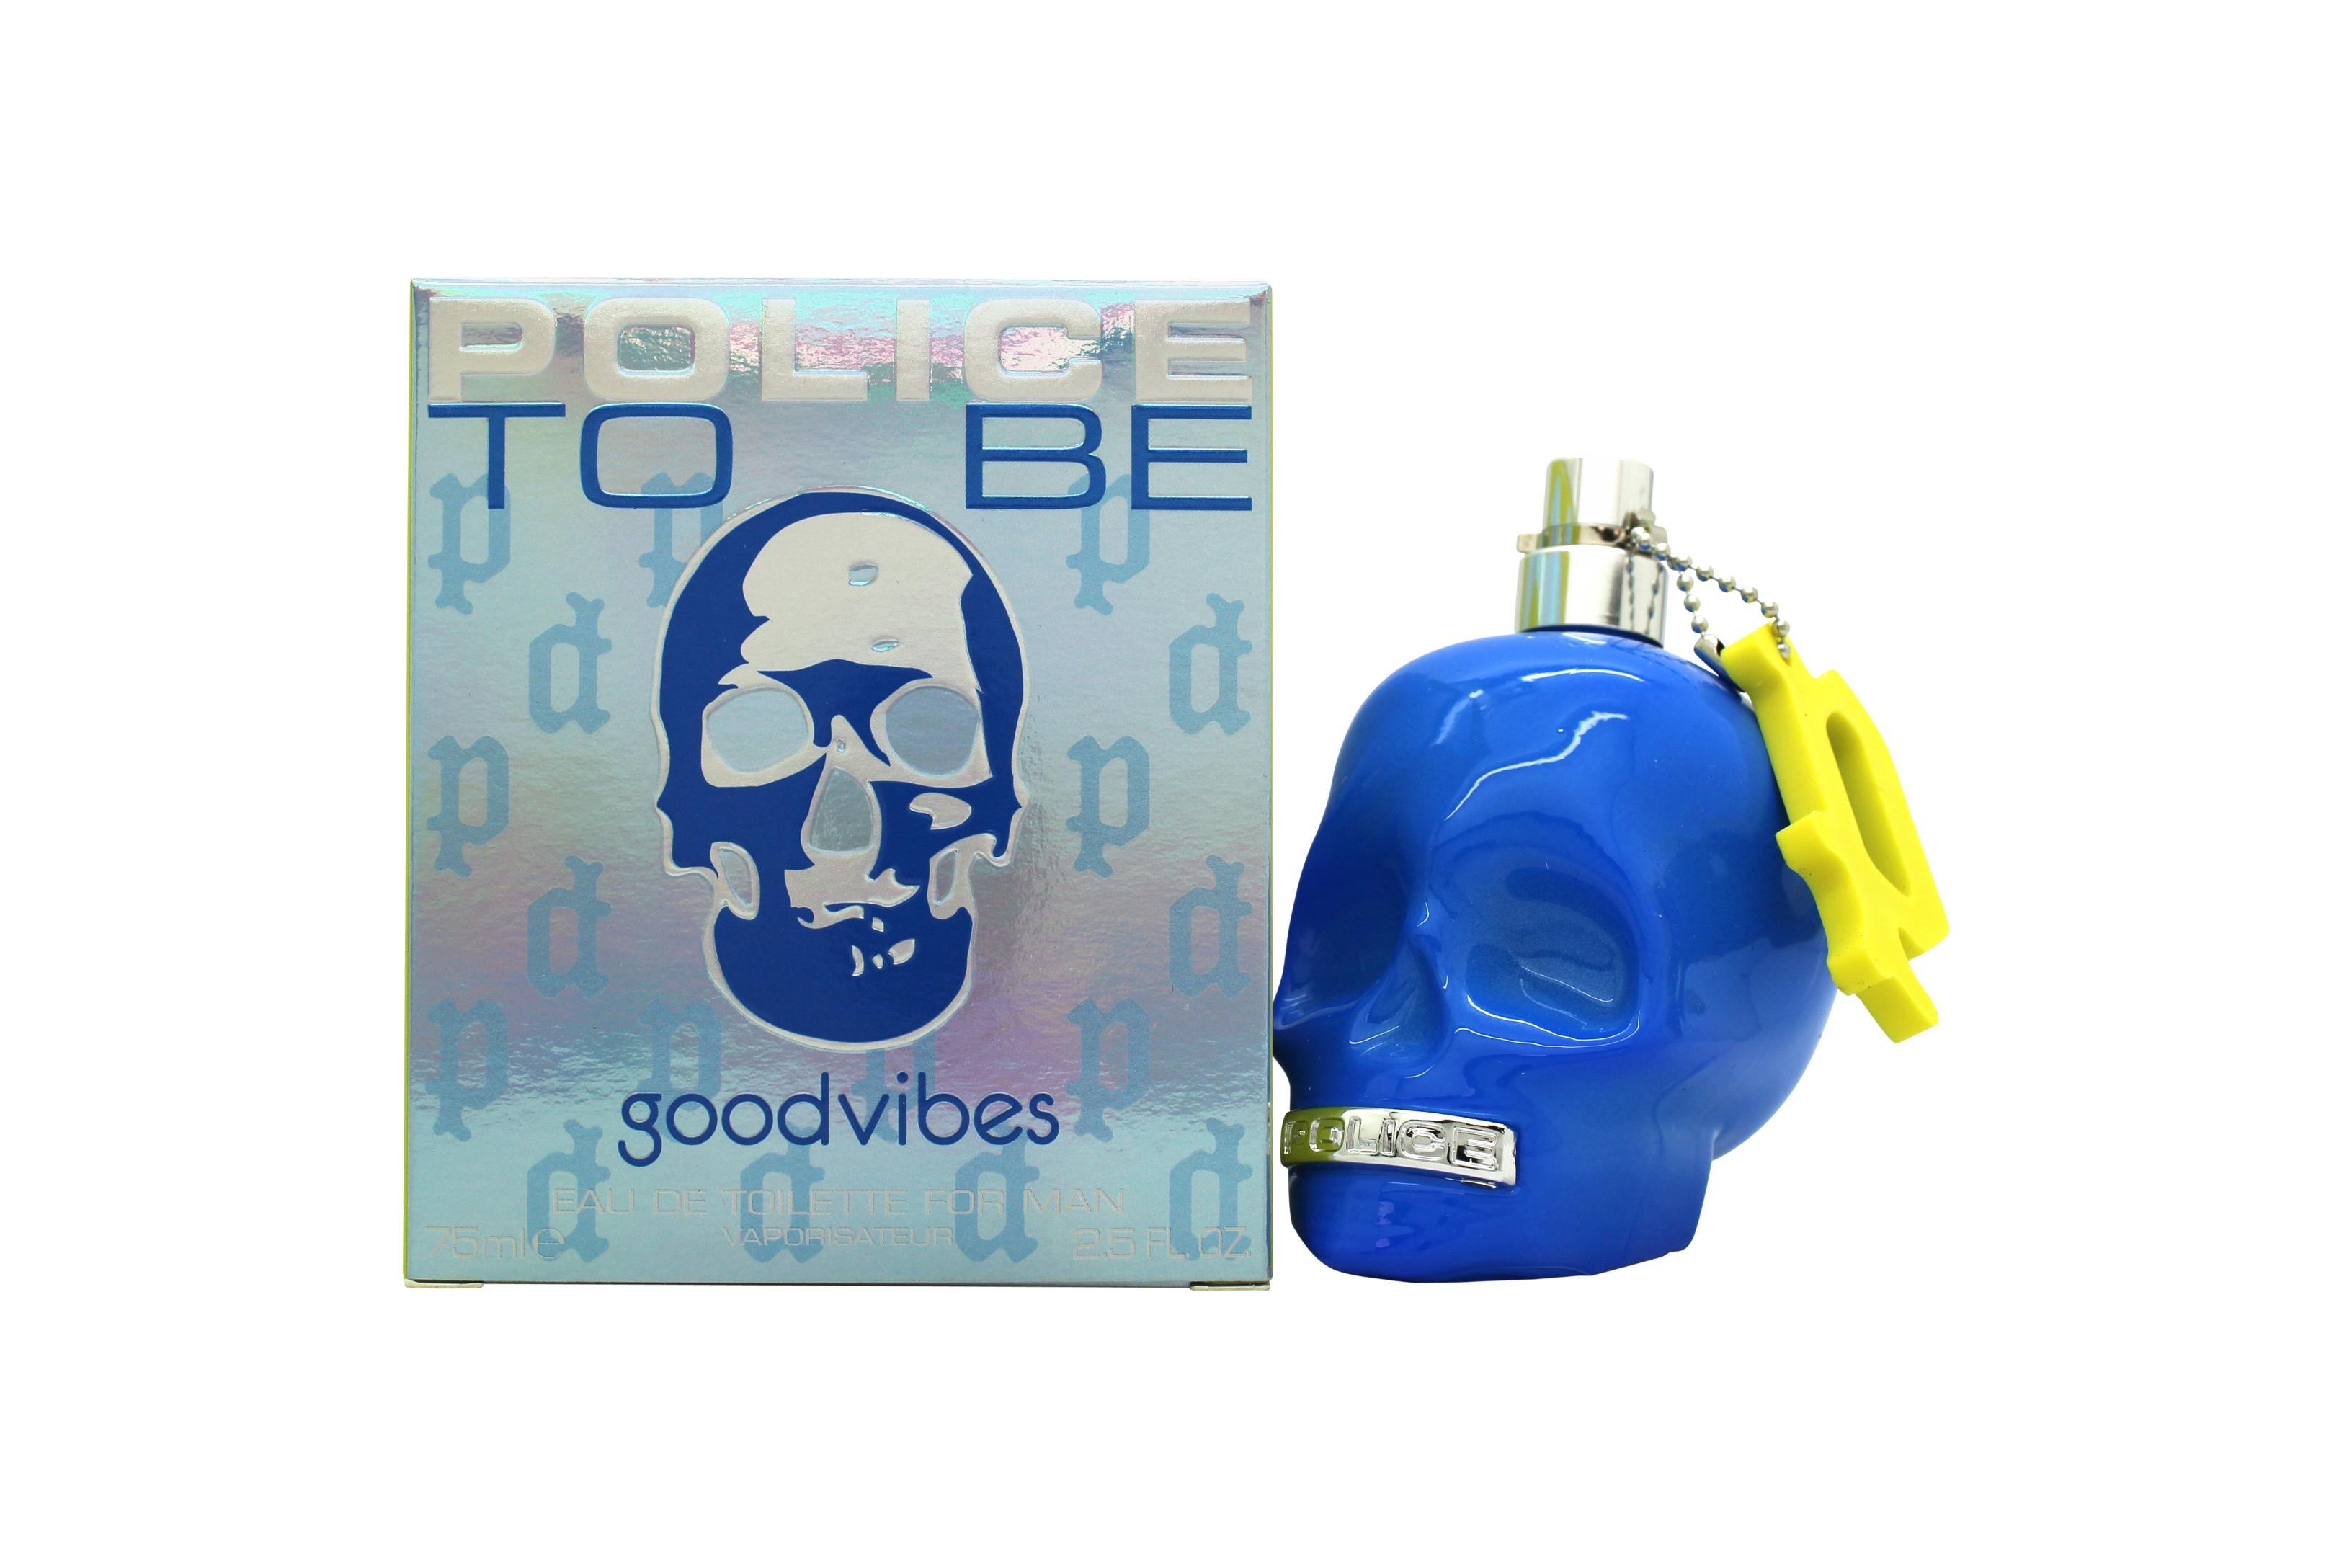 View Police To Be Goodvibes For Him Eau de Toilette 75ml Spray information